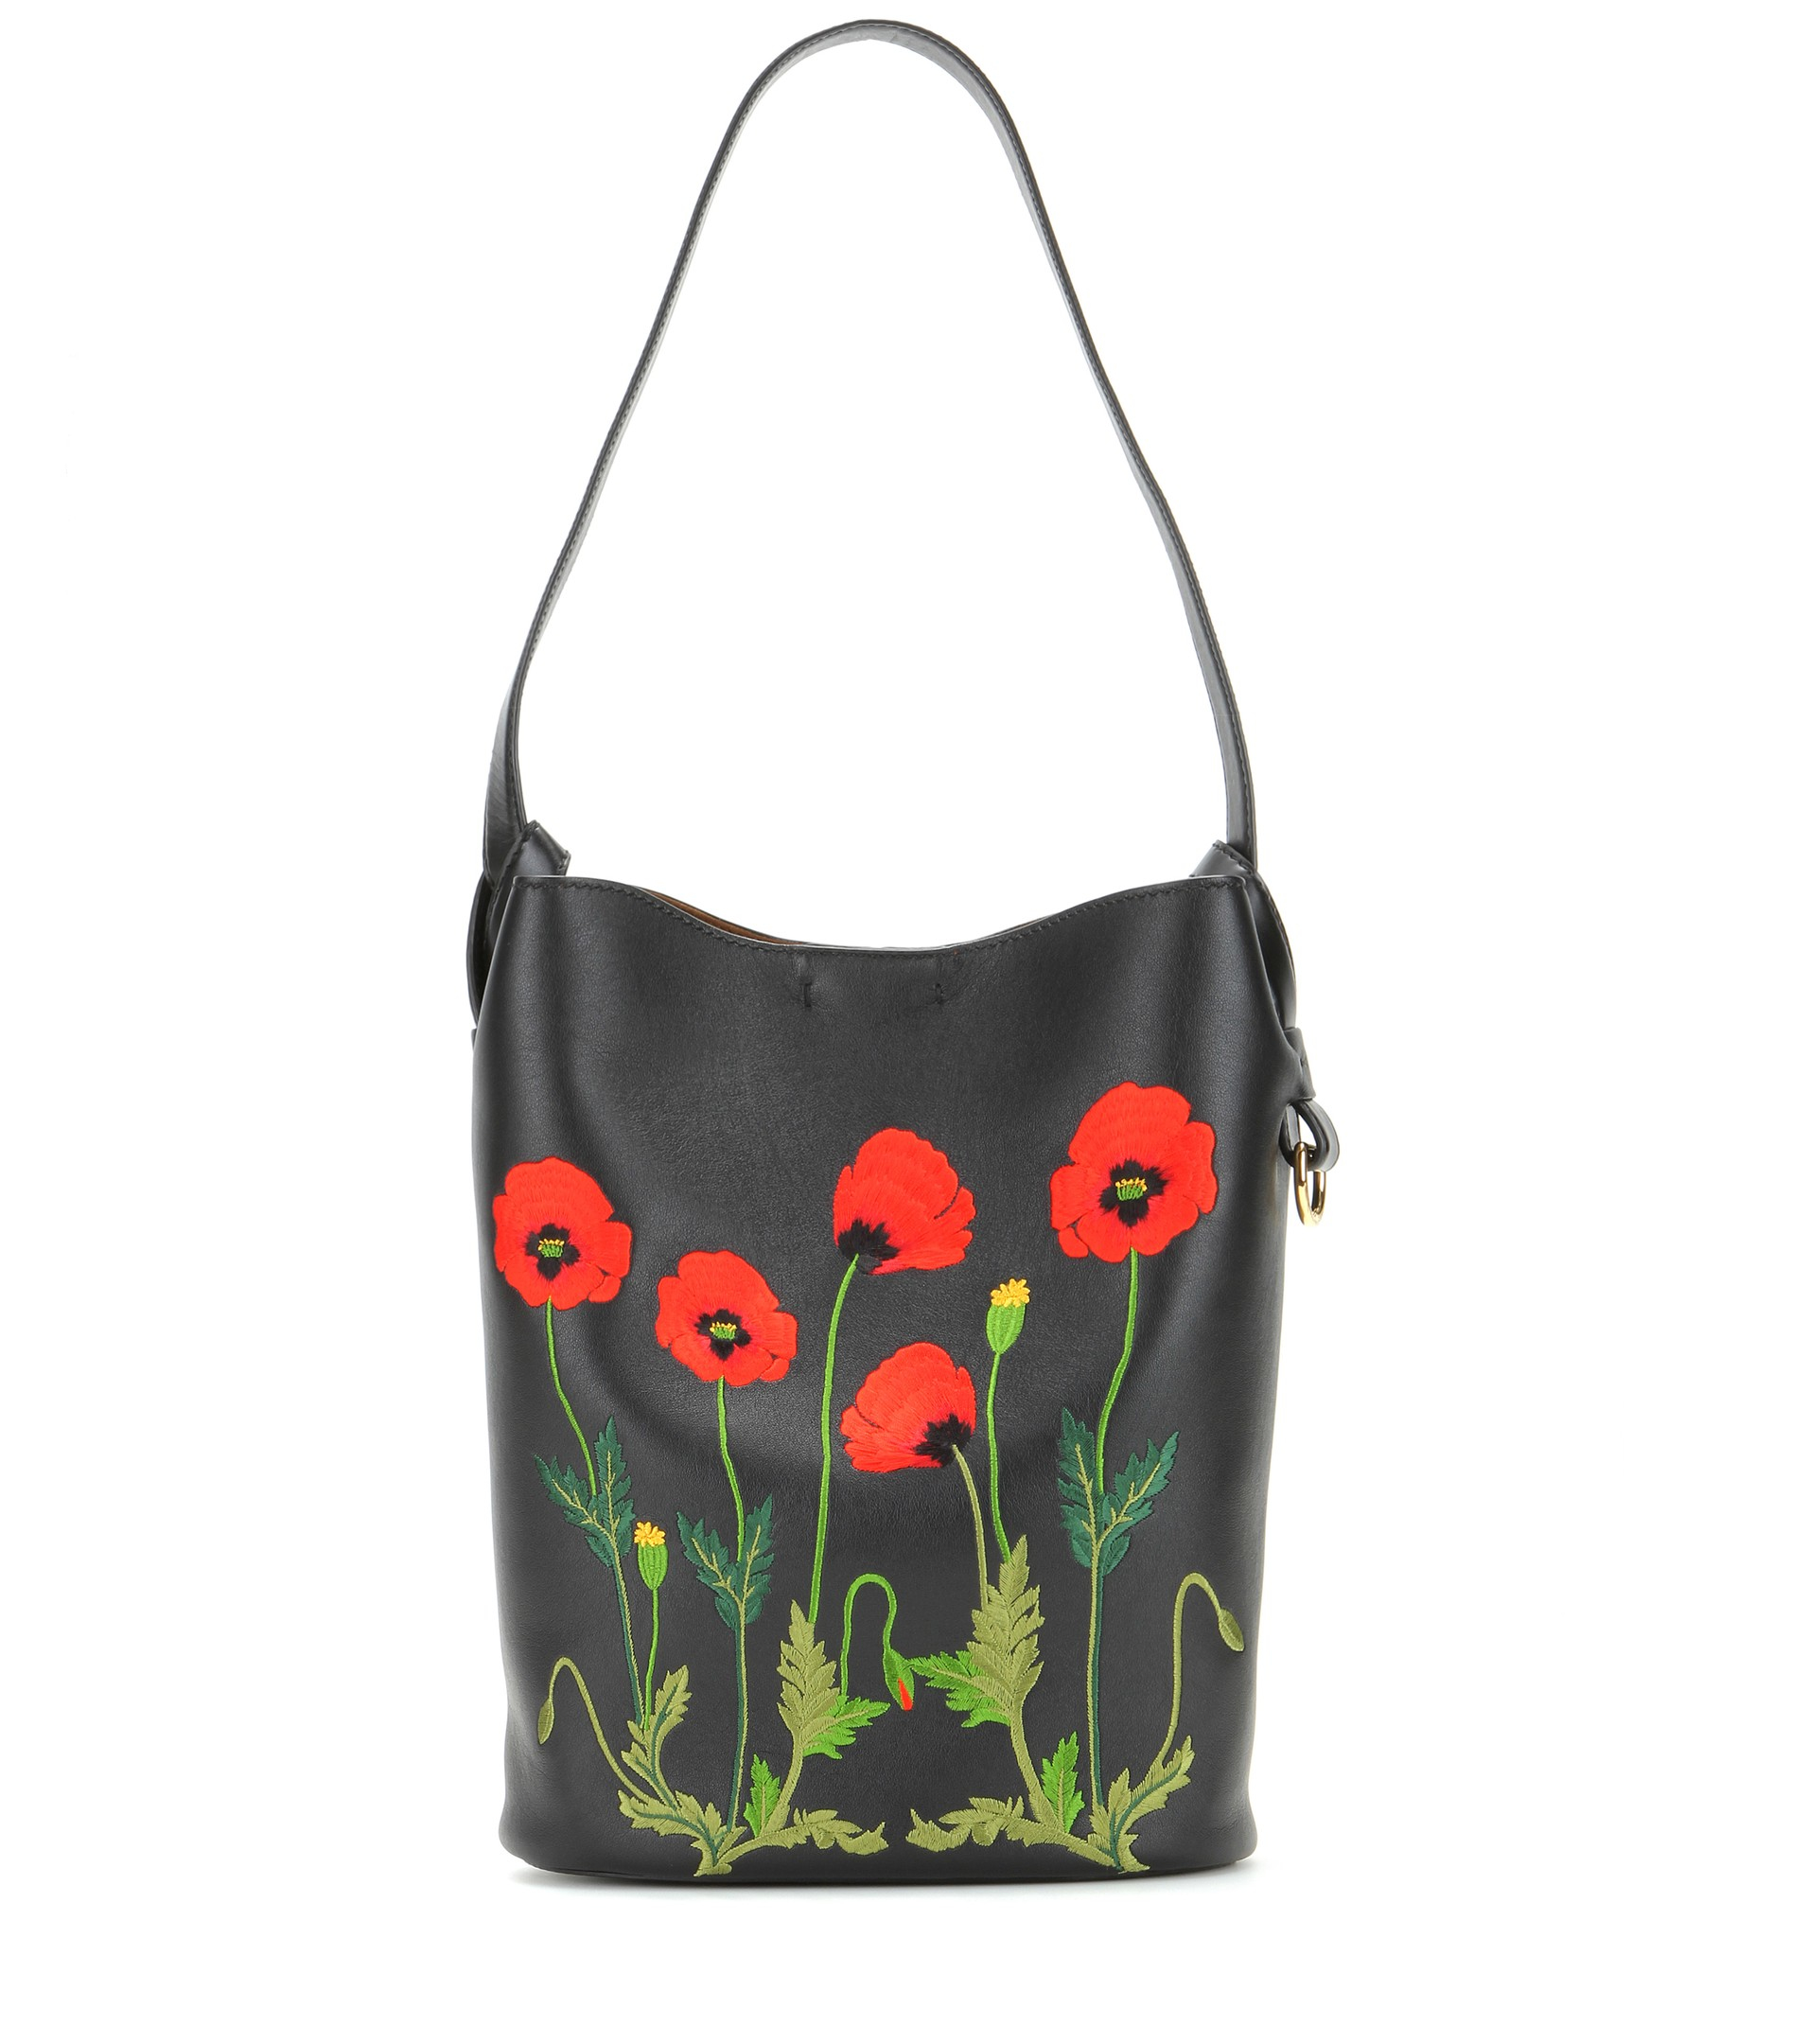 Stella McCartney Embroidered Faux Leather Bucket Bag in Black - Lyst